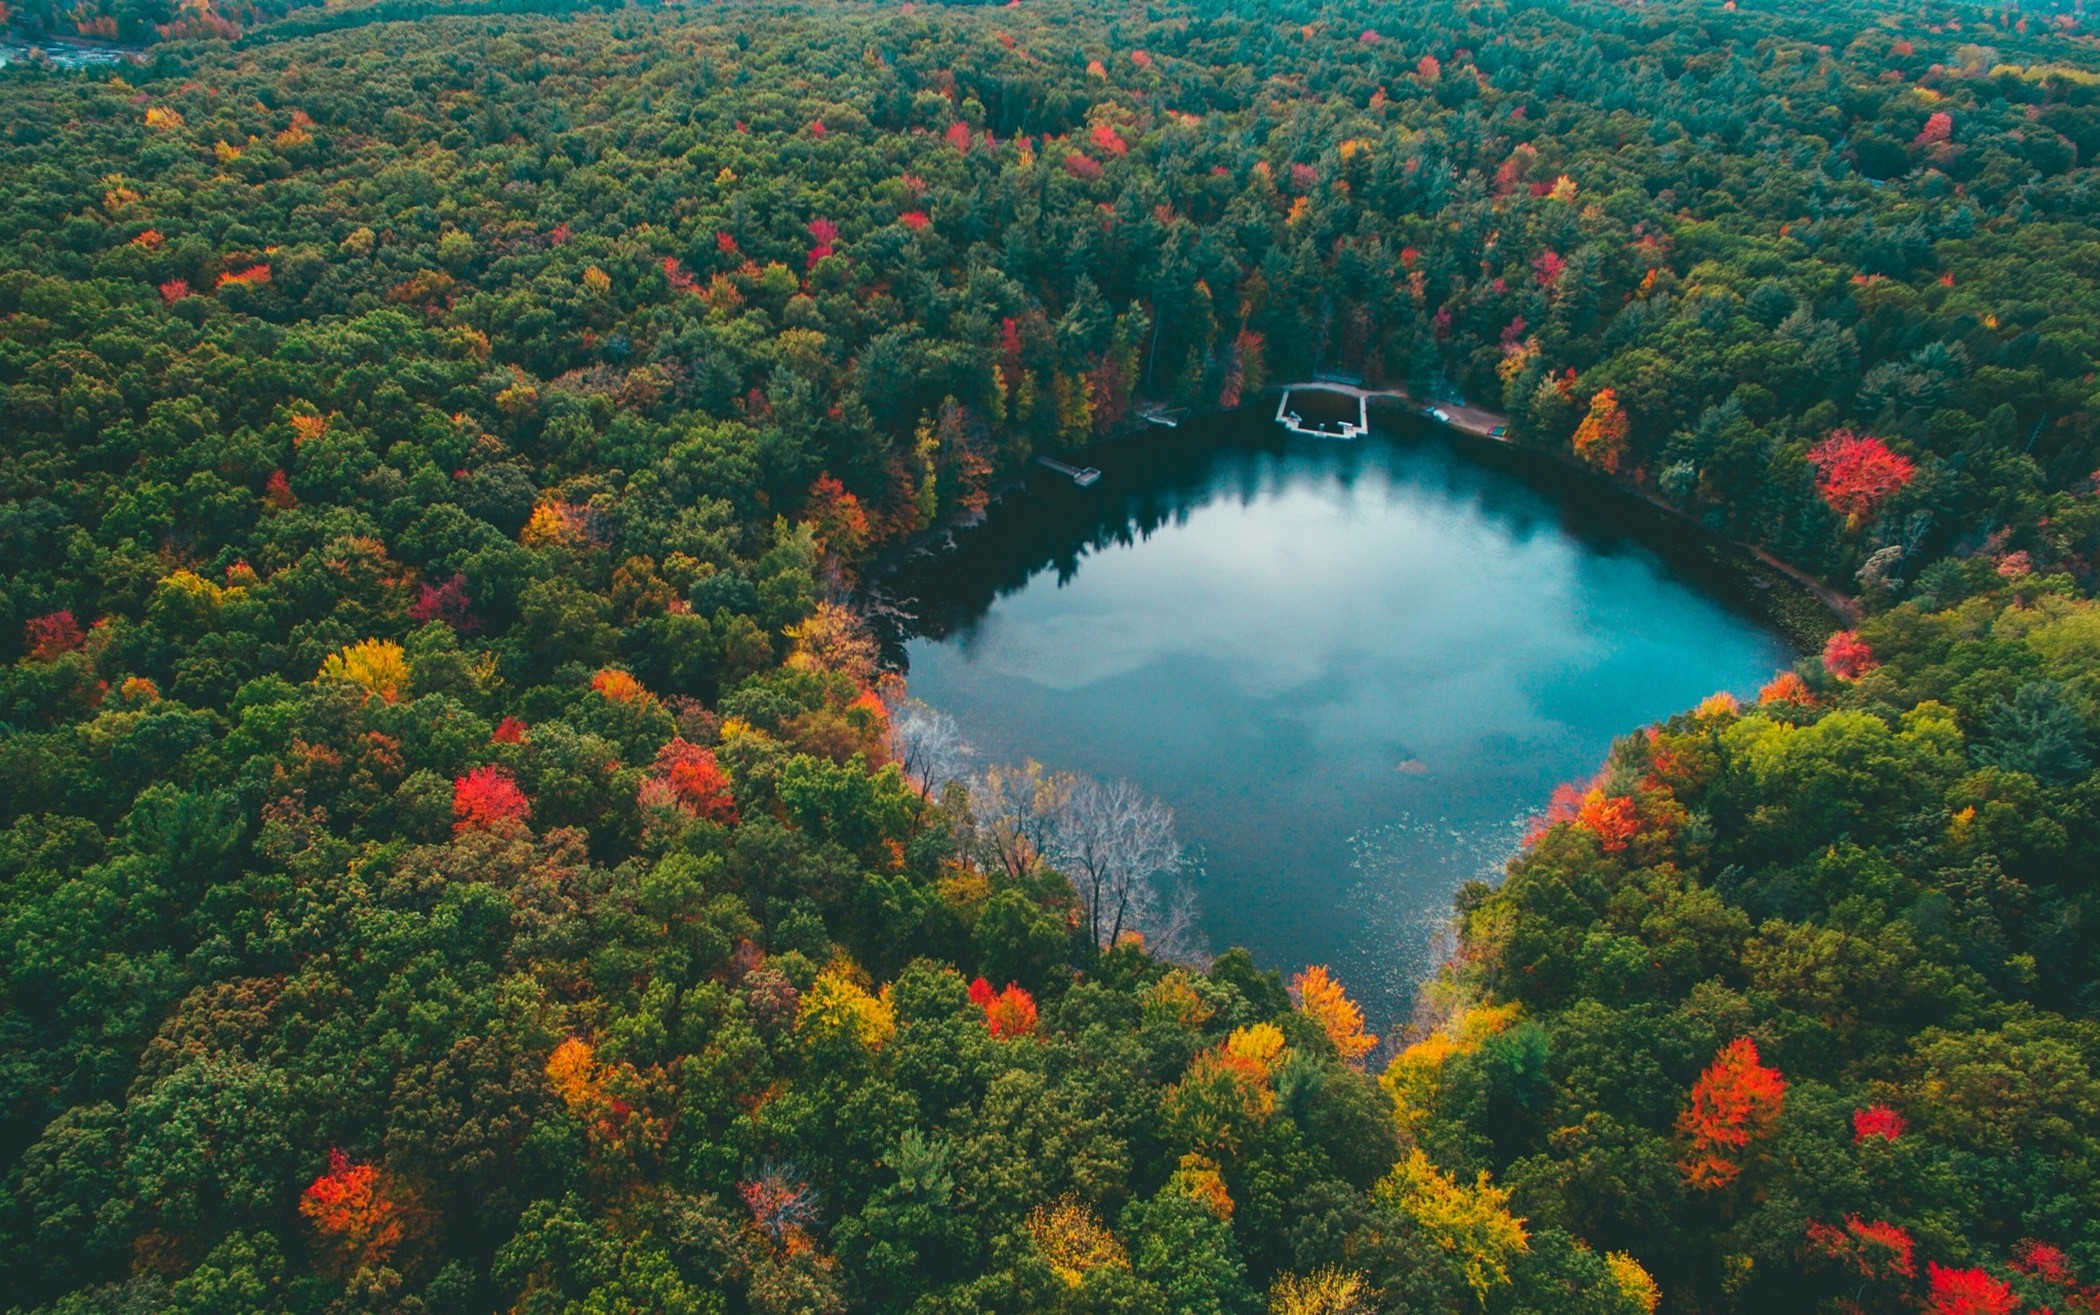 A lake deep in the woods